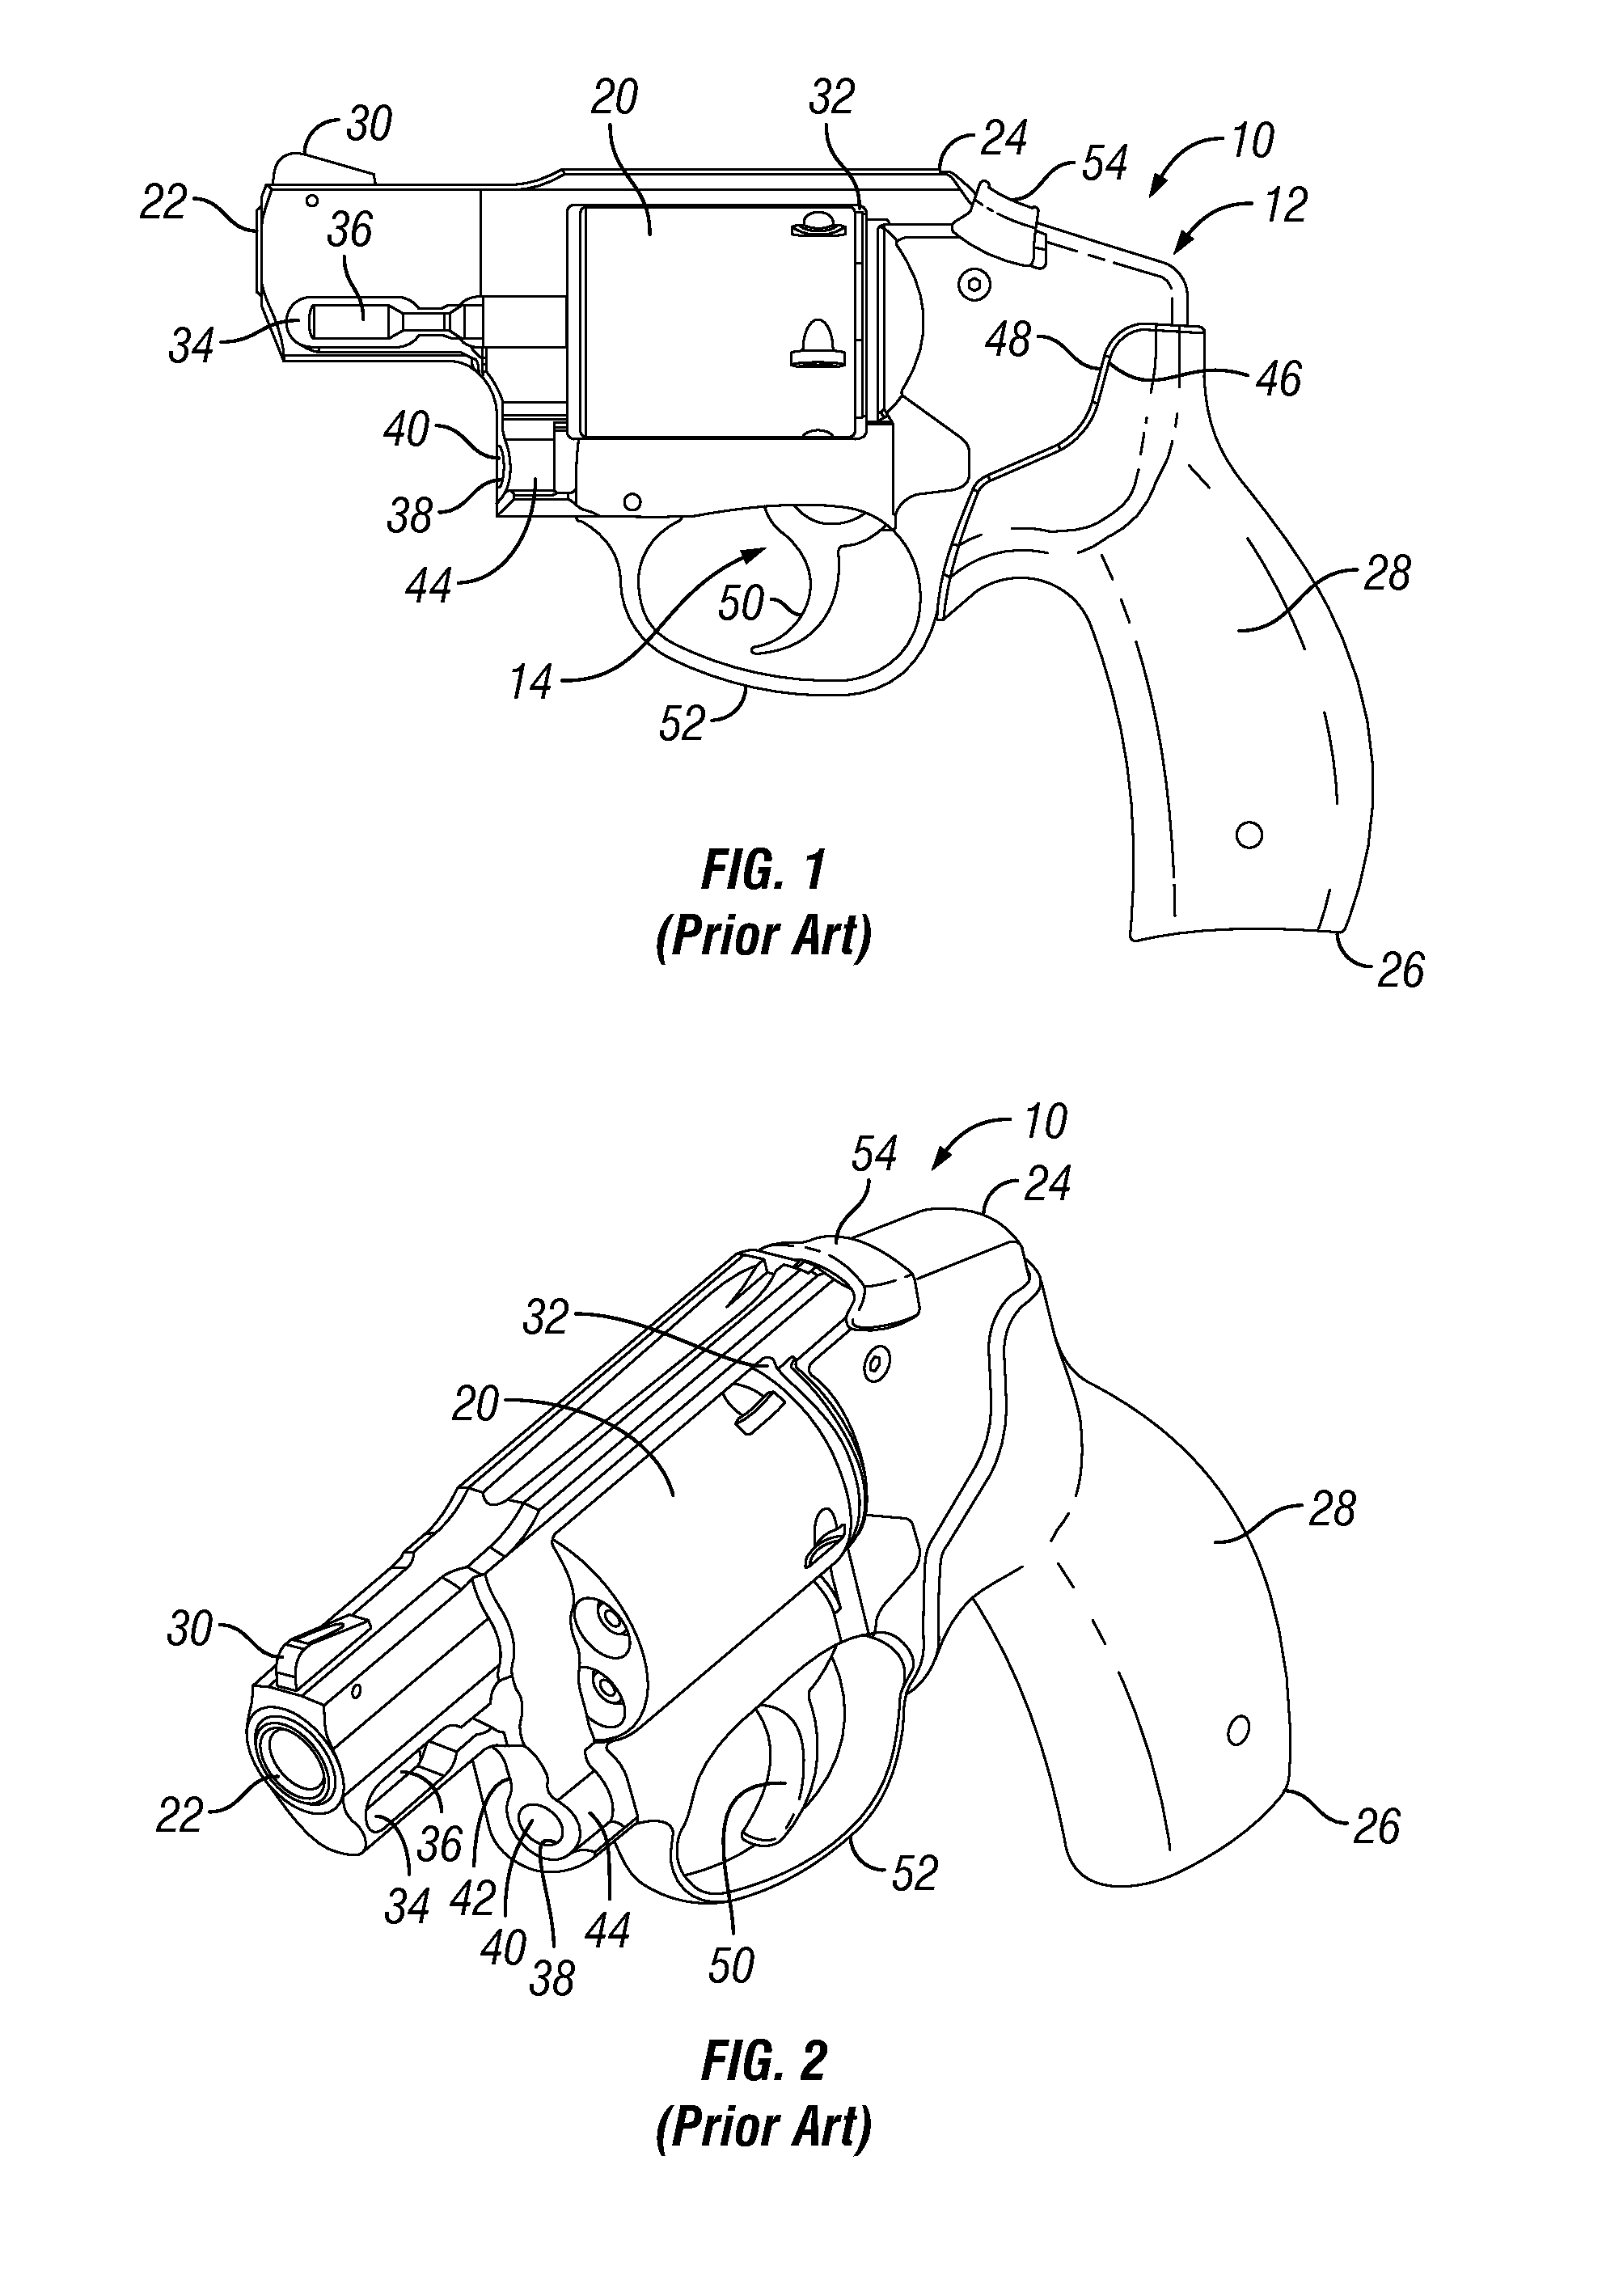 Frame-mounted laser aiming device